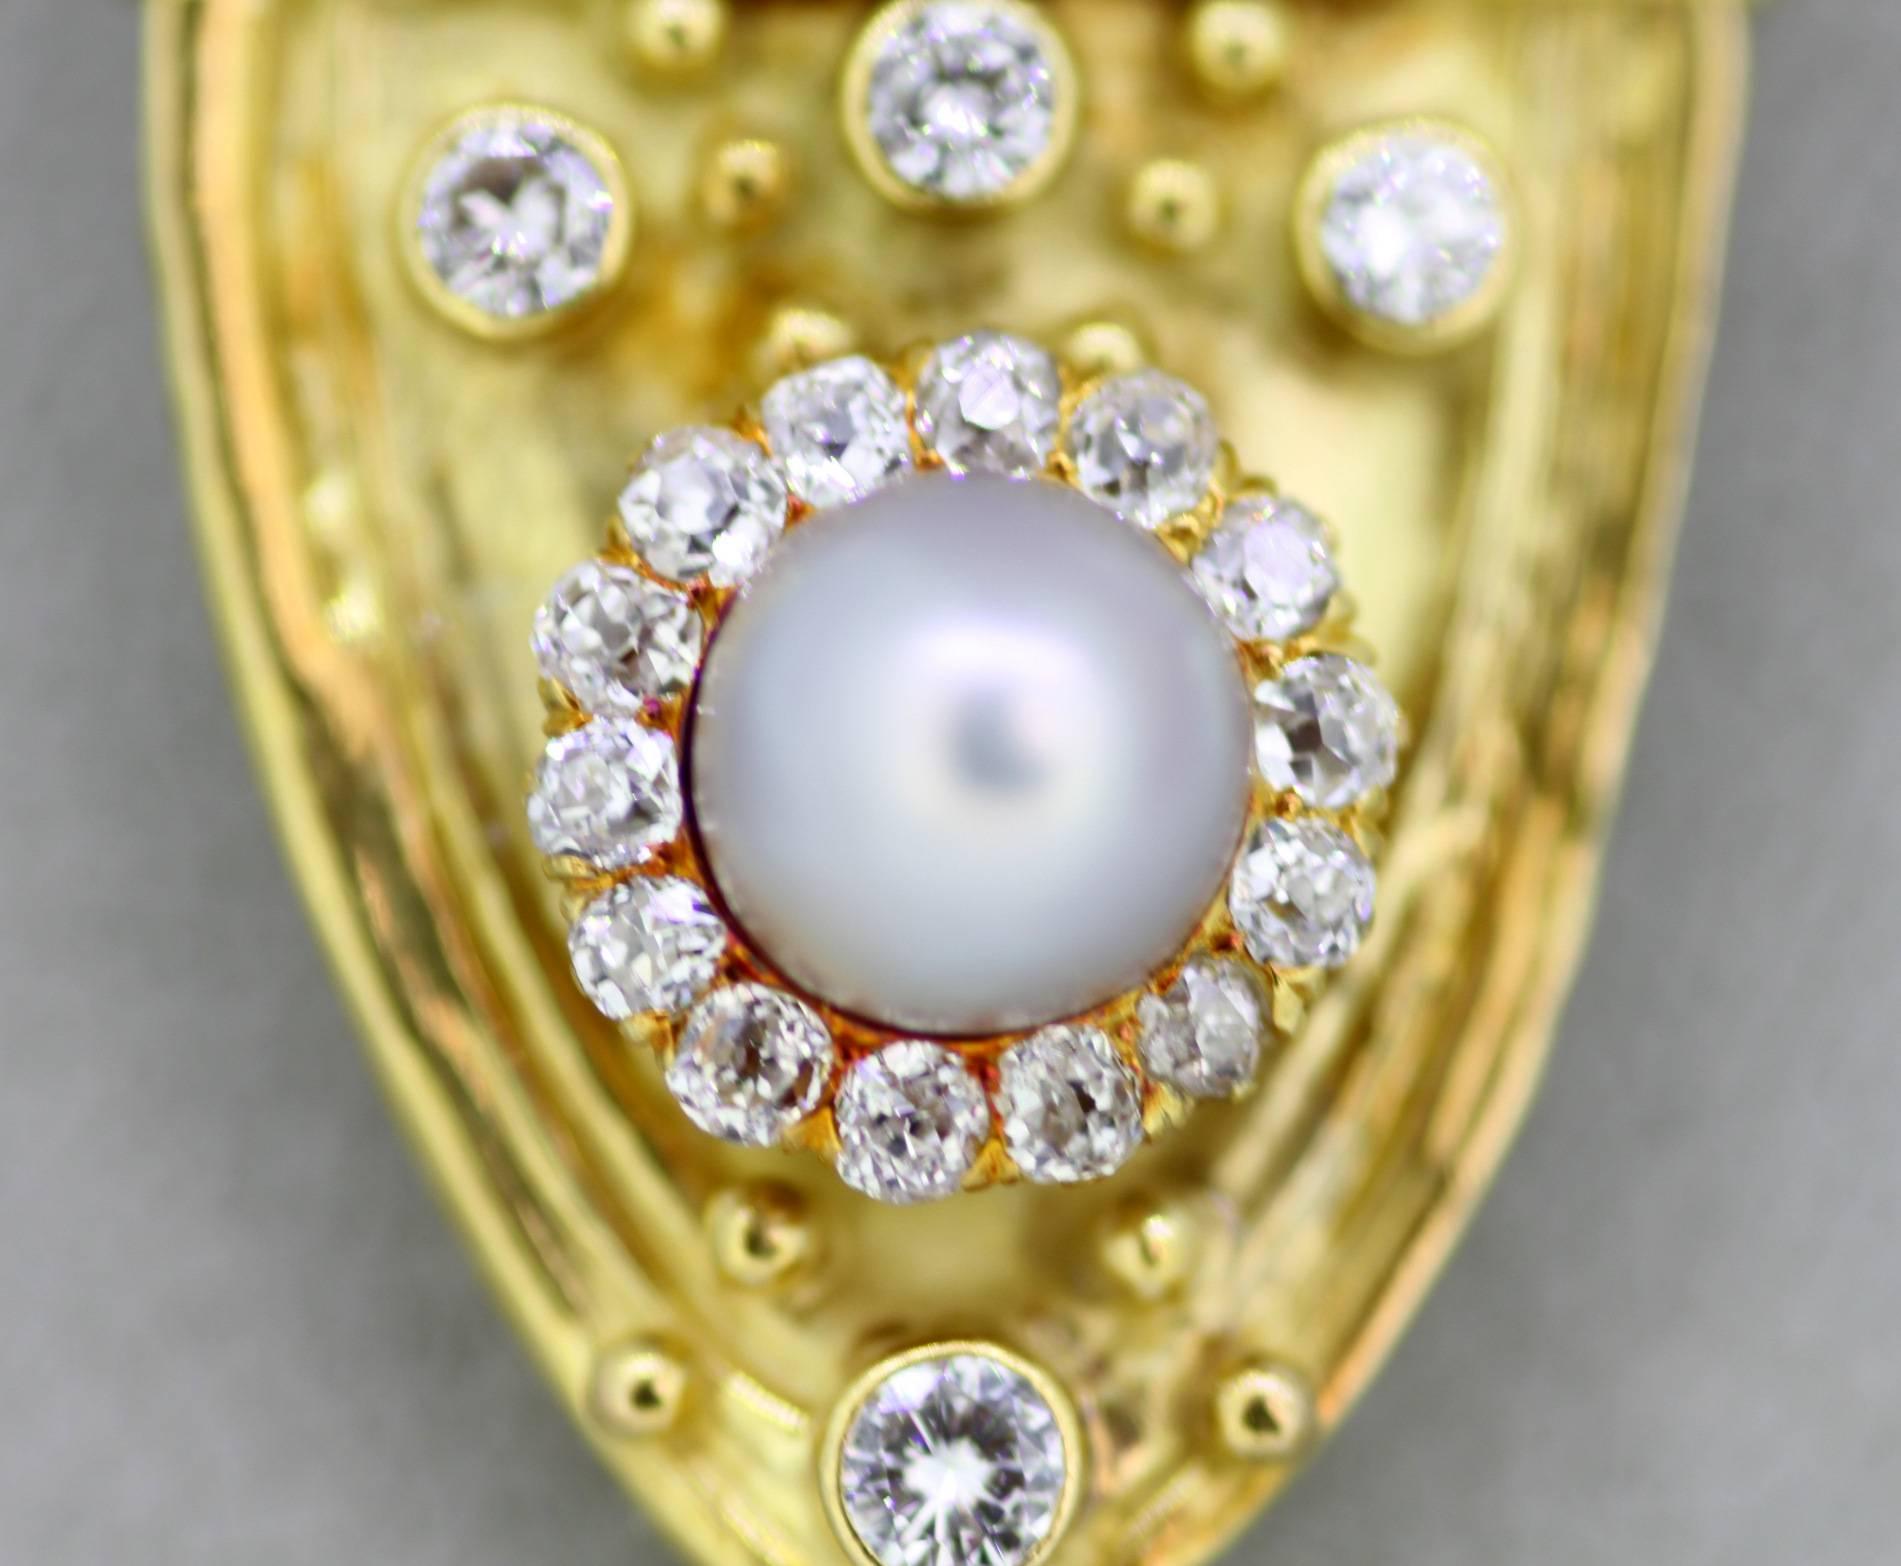 Women's or Men's Elizabeth Gage, 18 Karat Gold Brooch with Diamonds and Freshwater Pearl, 1991